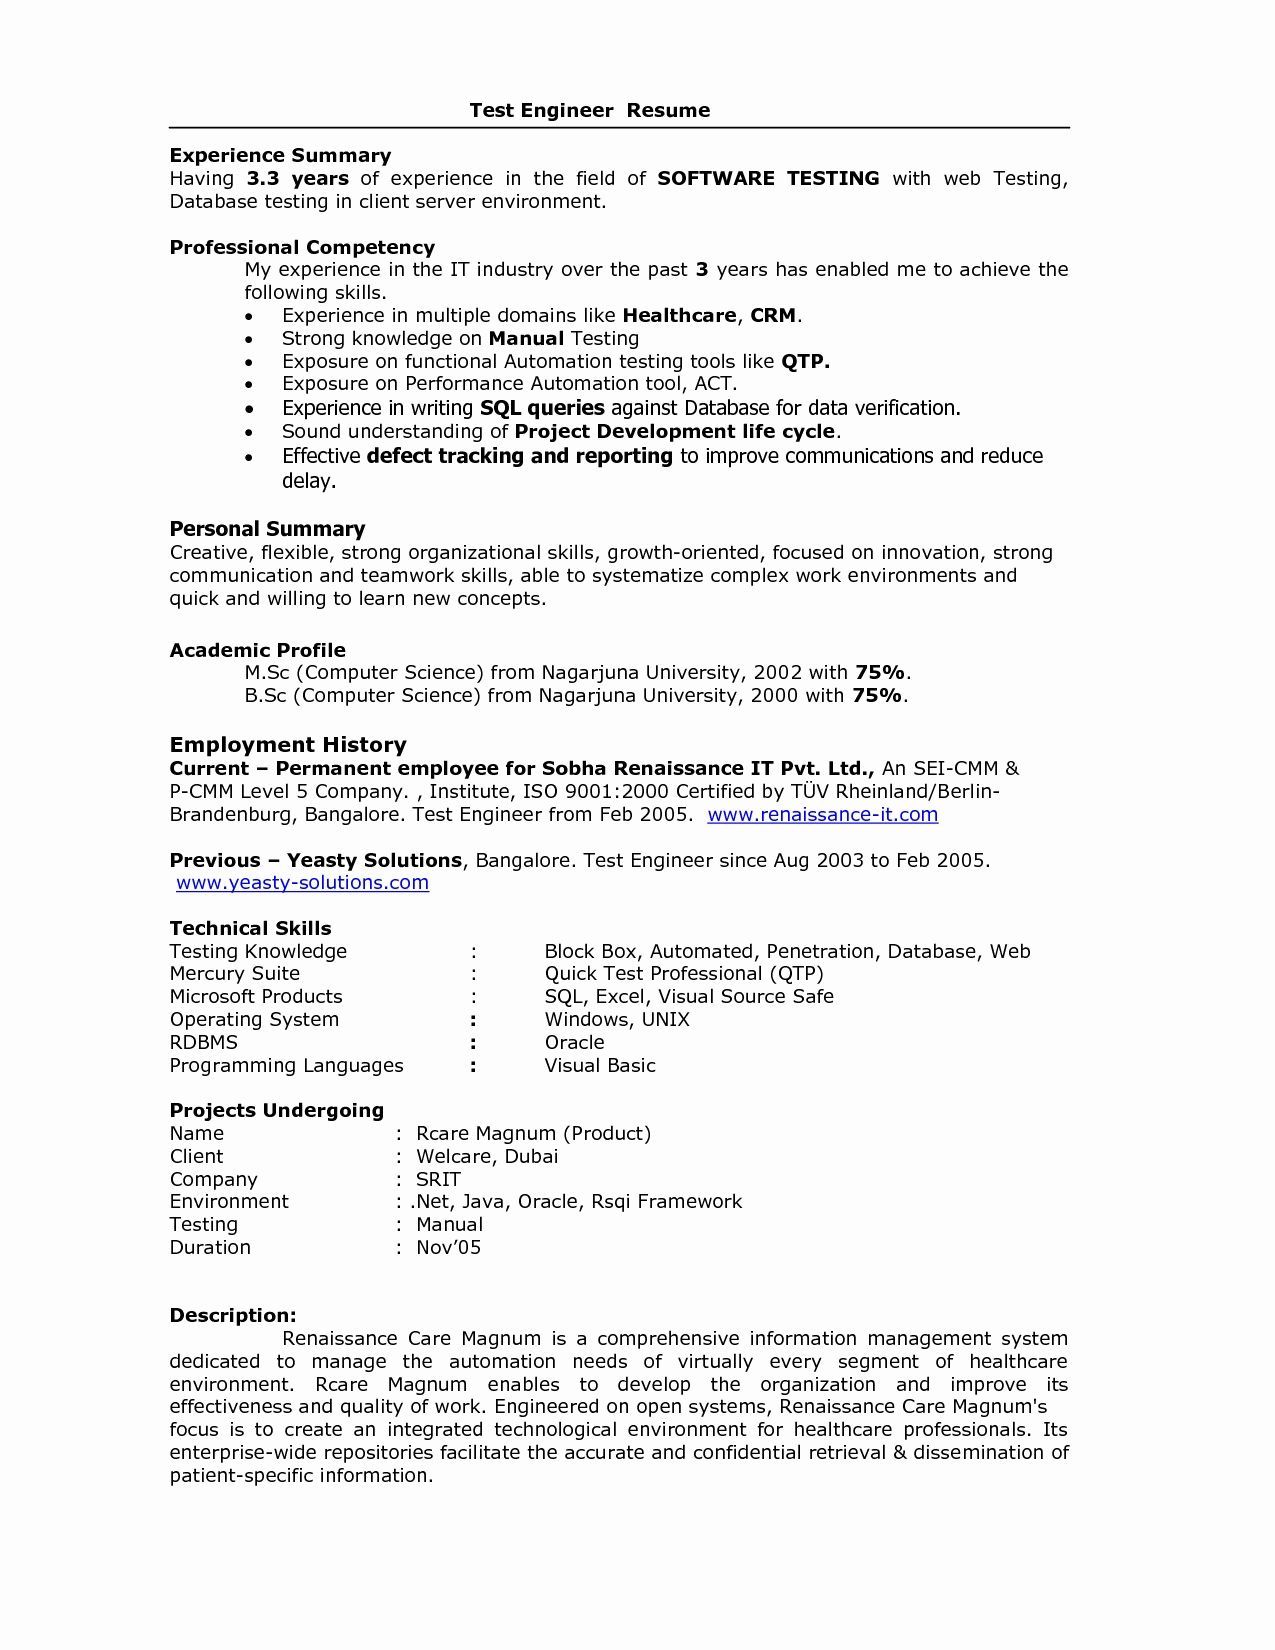 Software Testing Resume Samples For 3 Years Experience